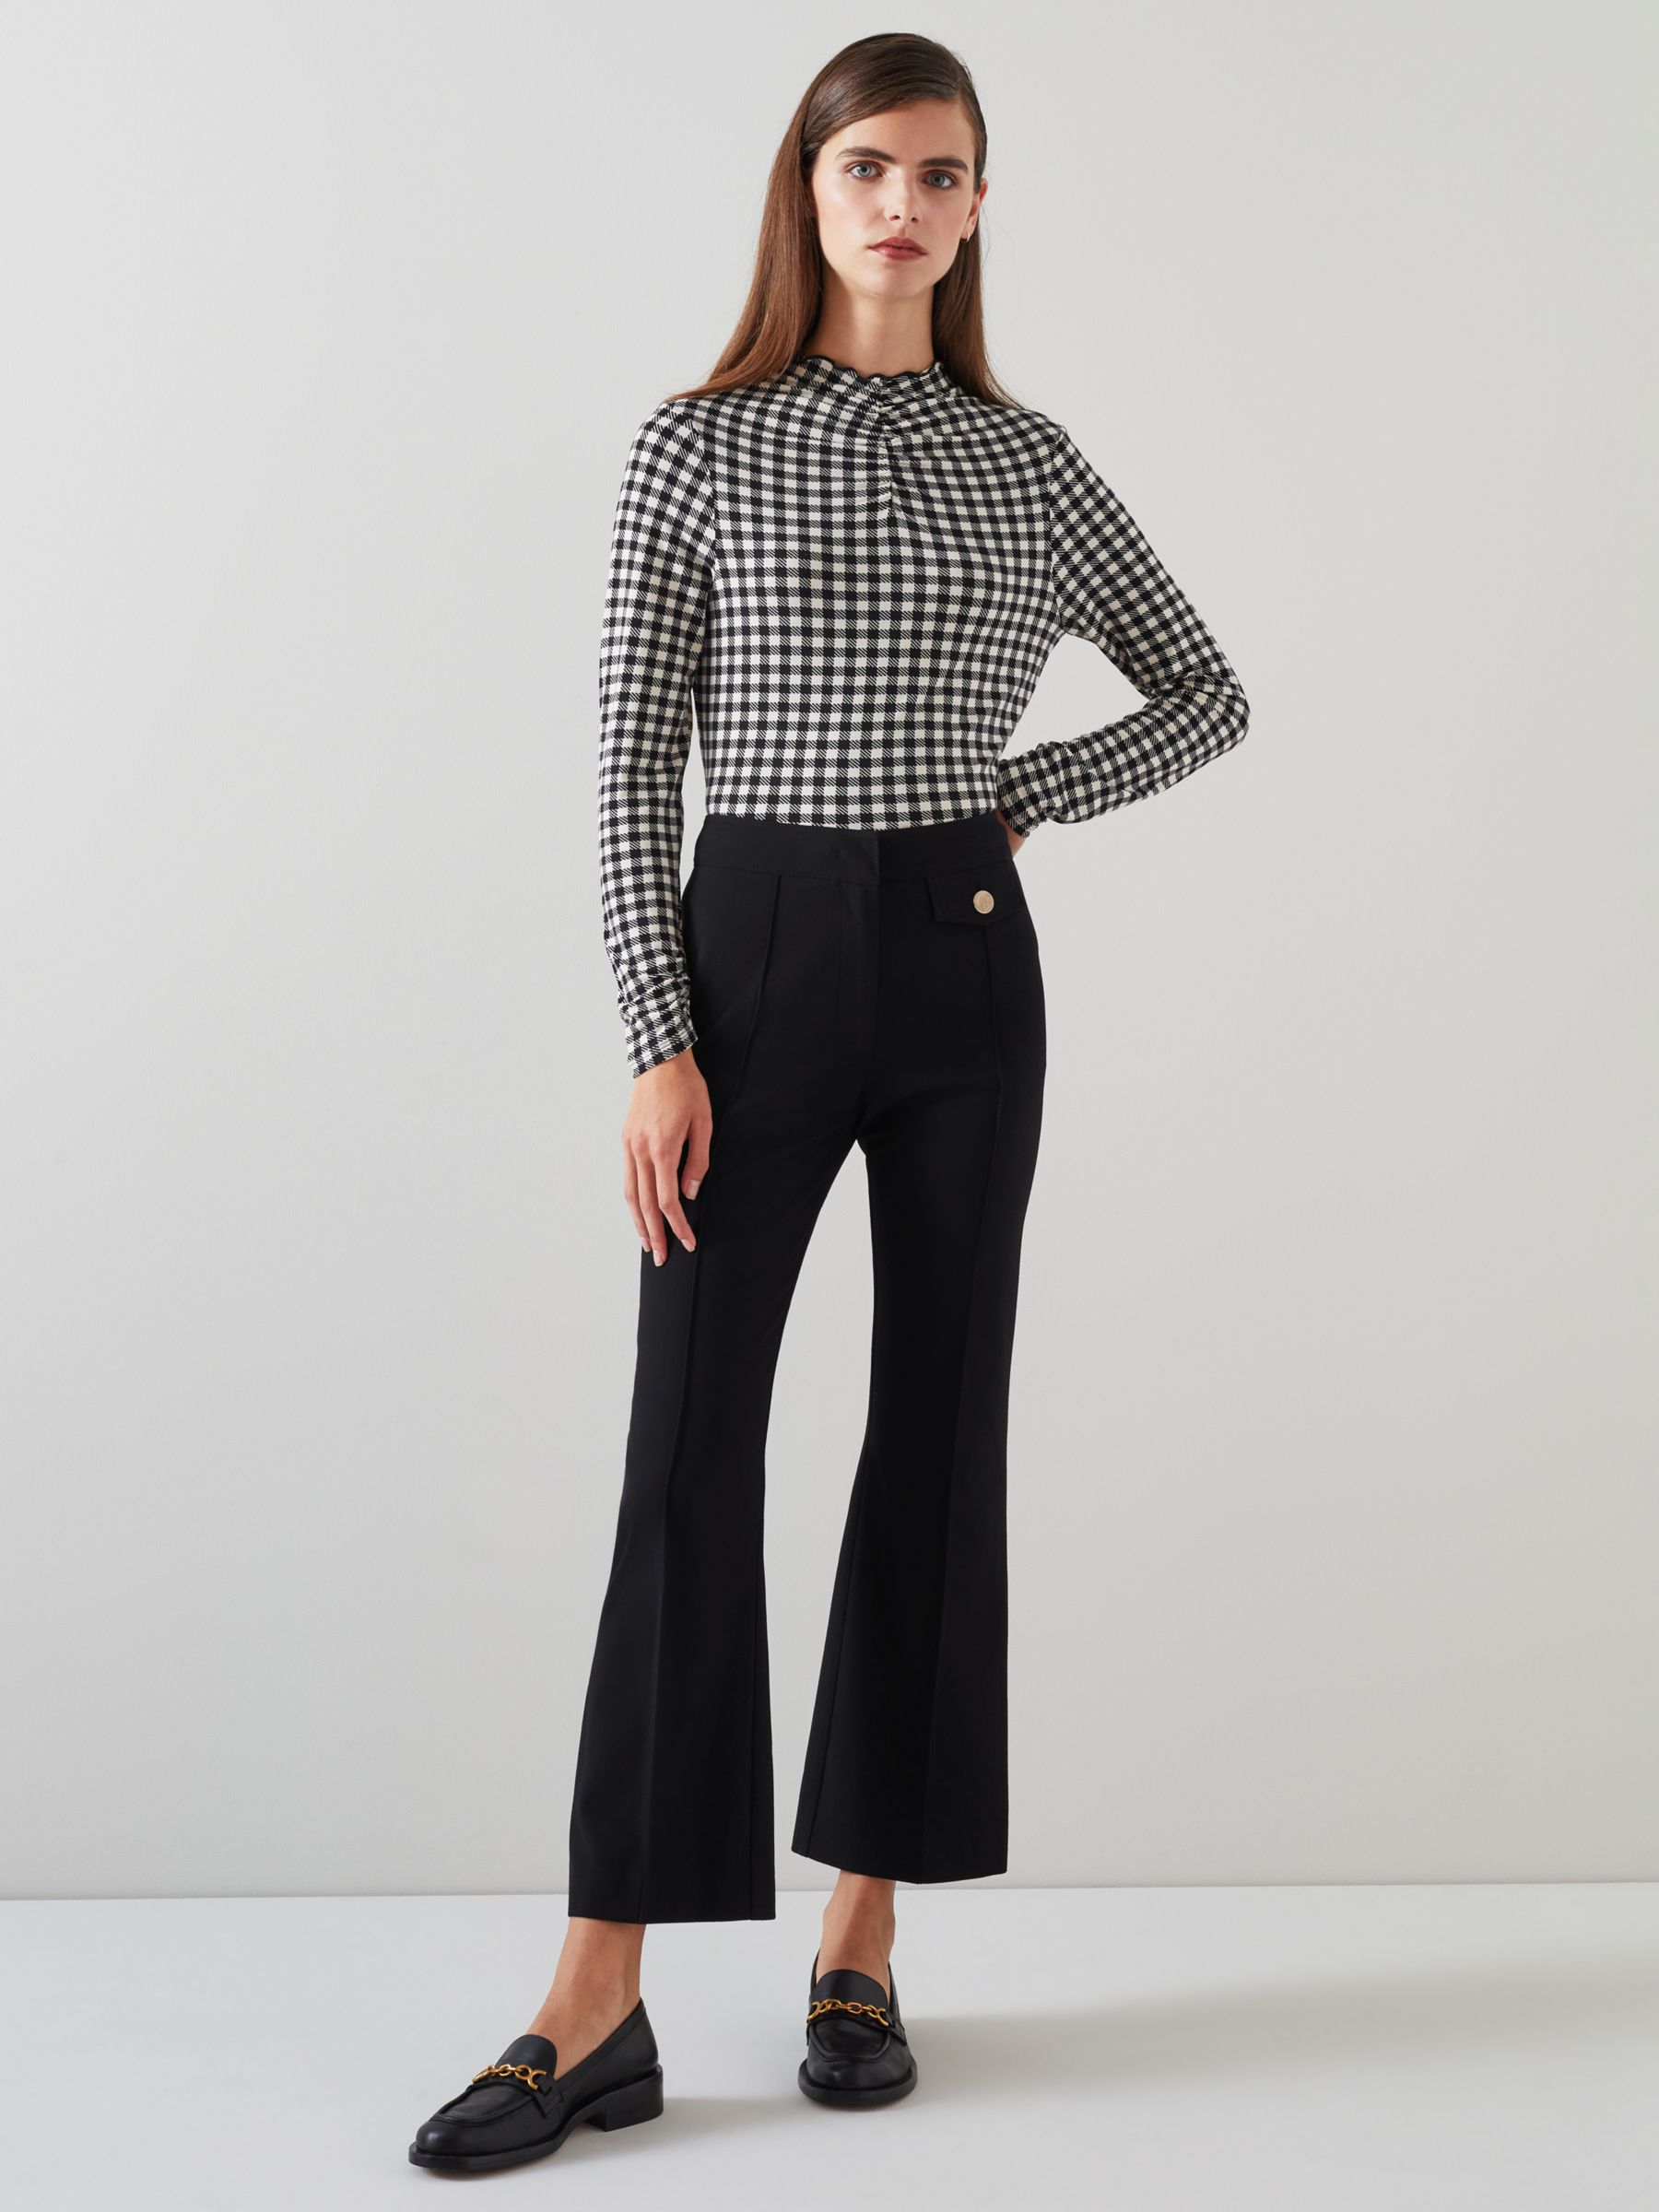 Kick Flare Trousers Houndstooth Pattern Women's Pants With Pockets Classic  Business Casual Outfit 